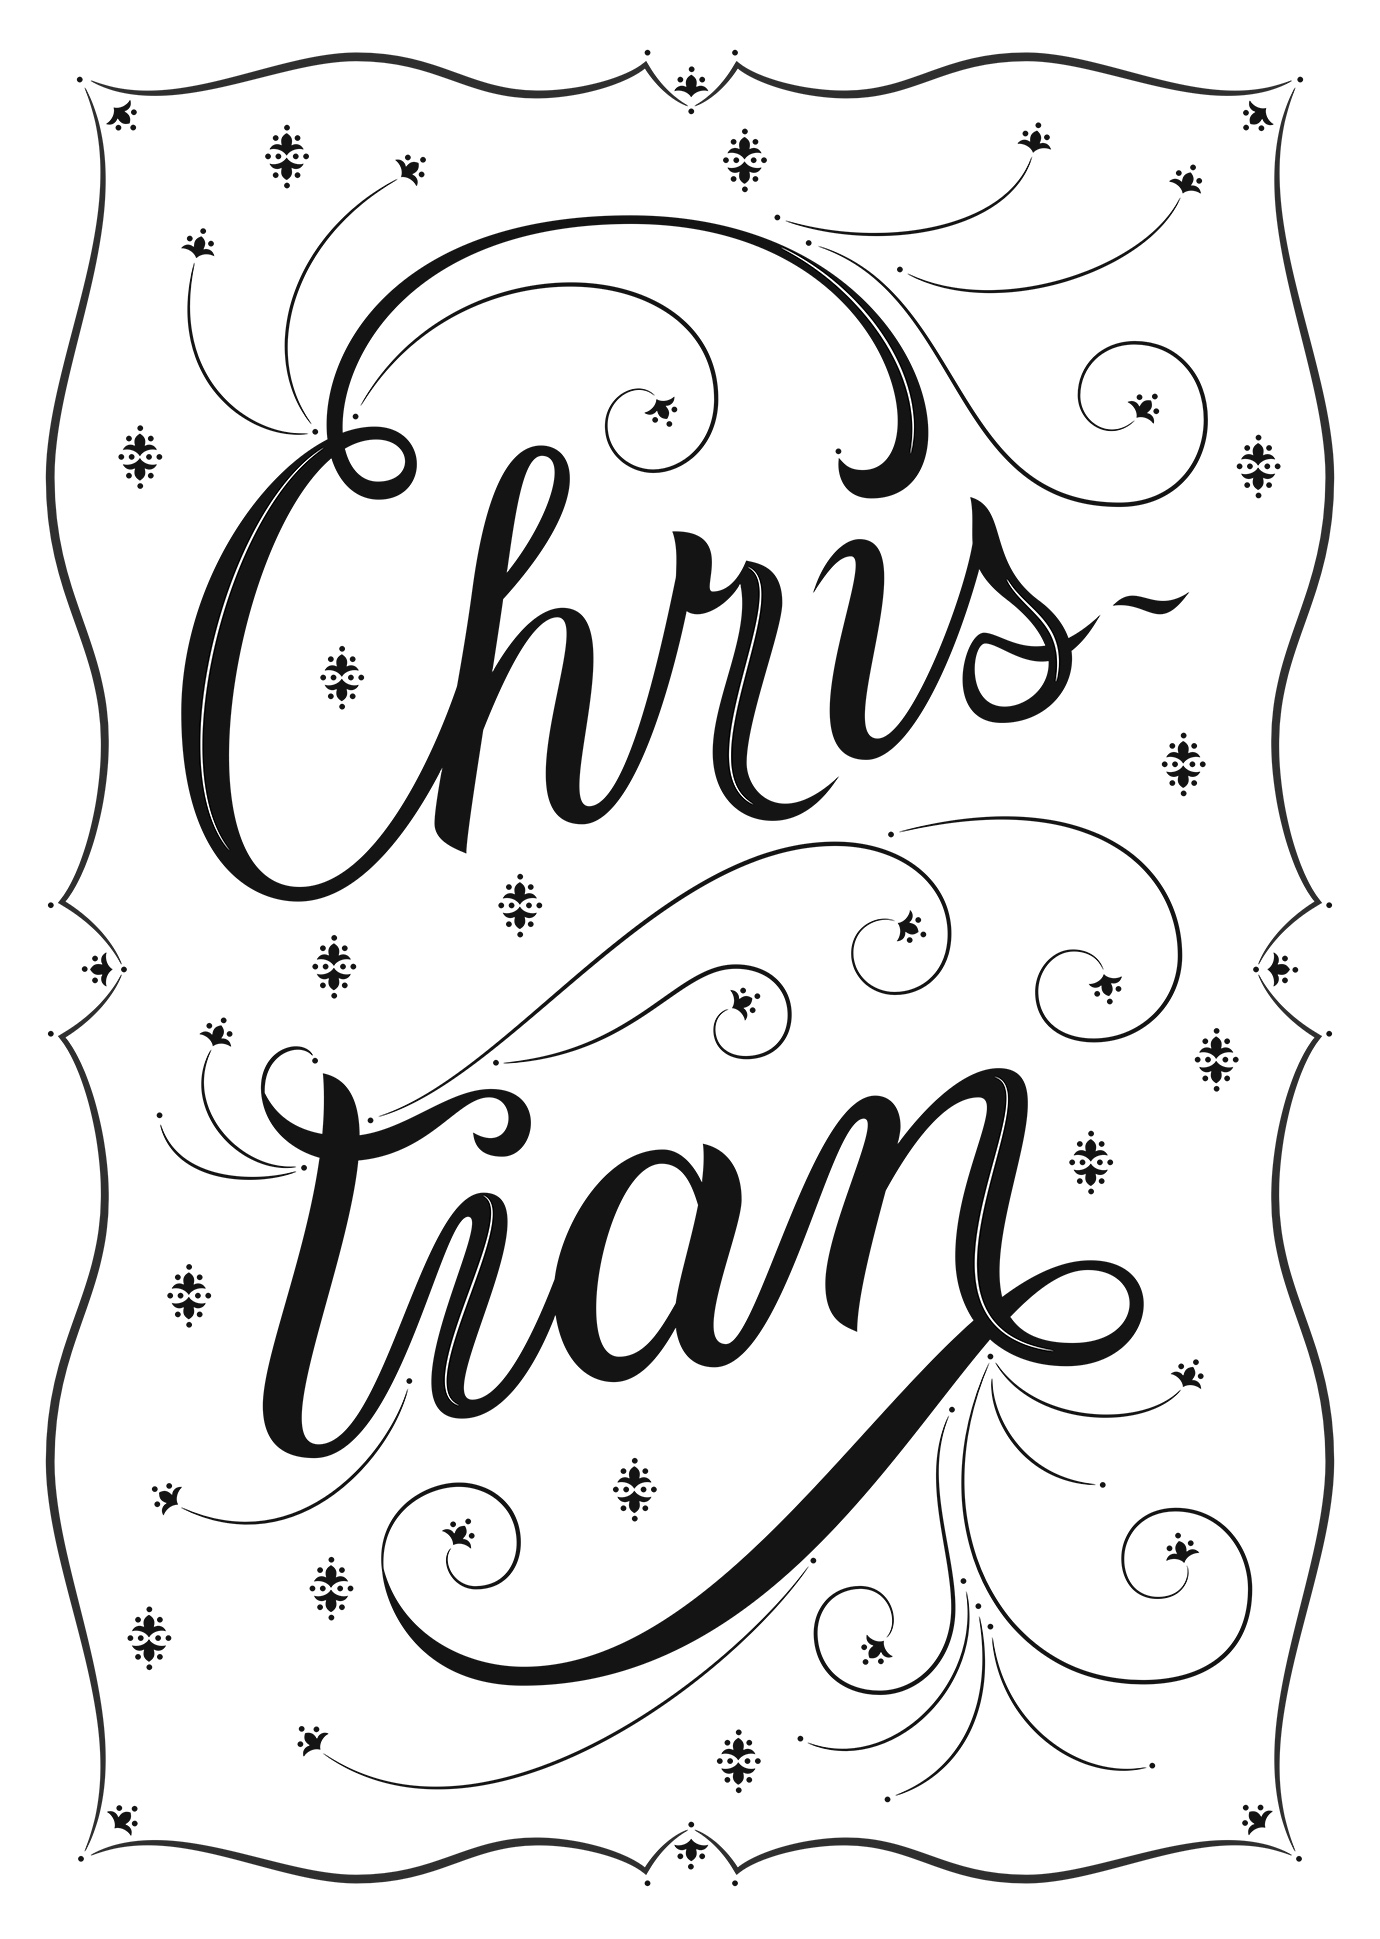 Lettering piece "Christian" in black and white